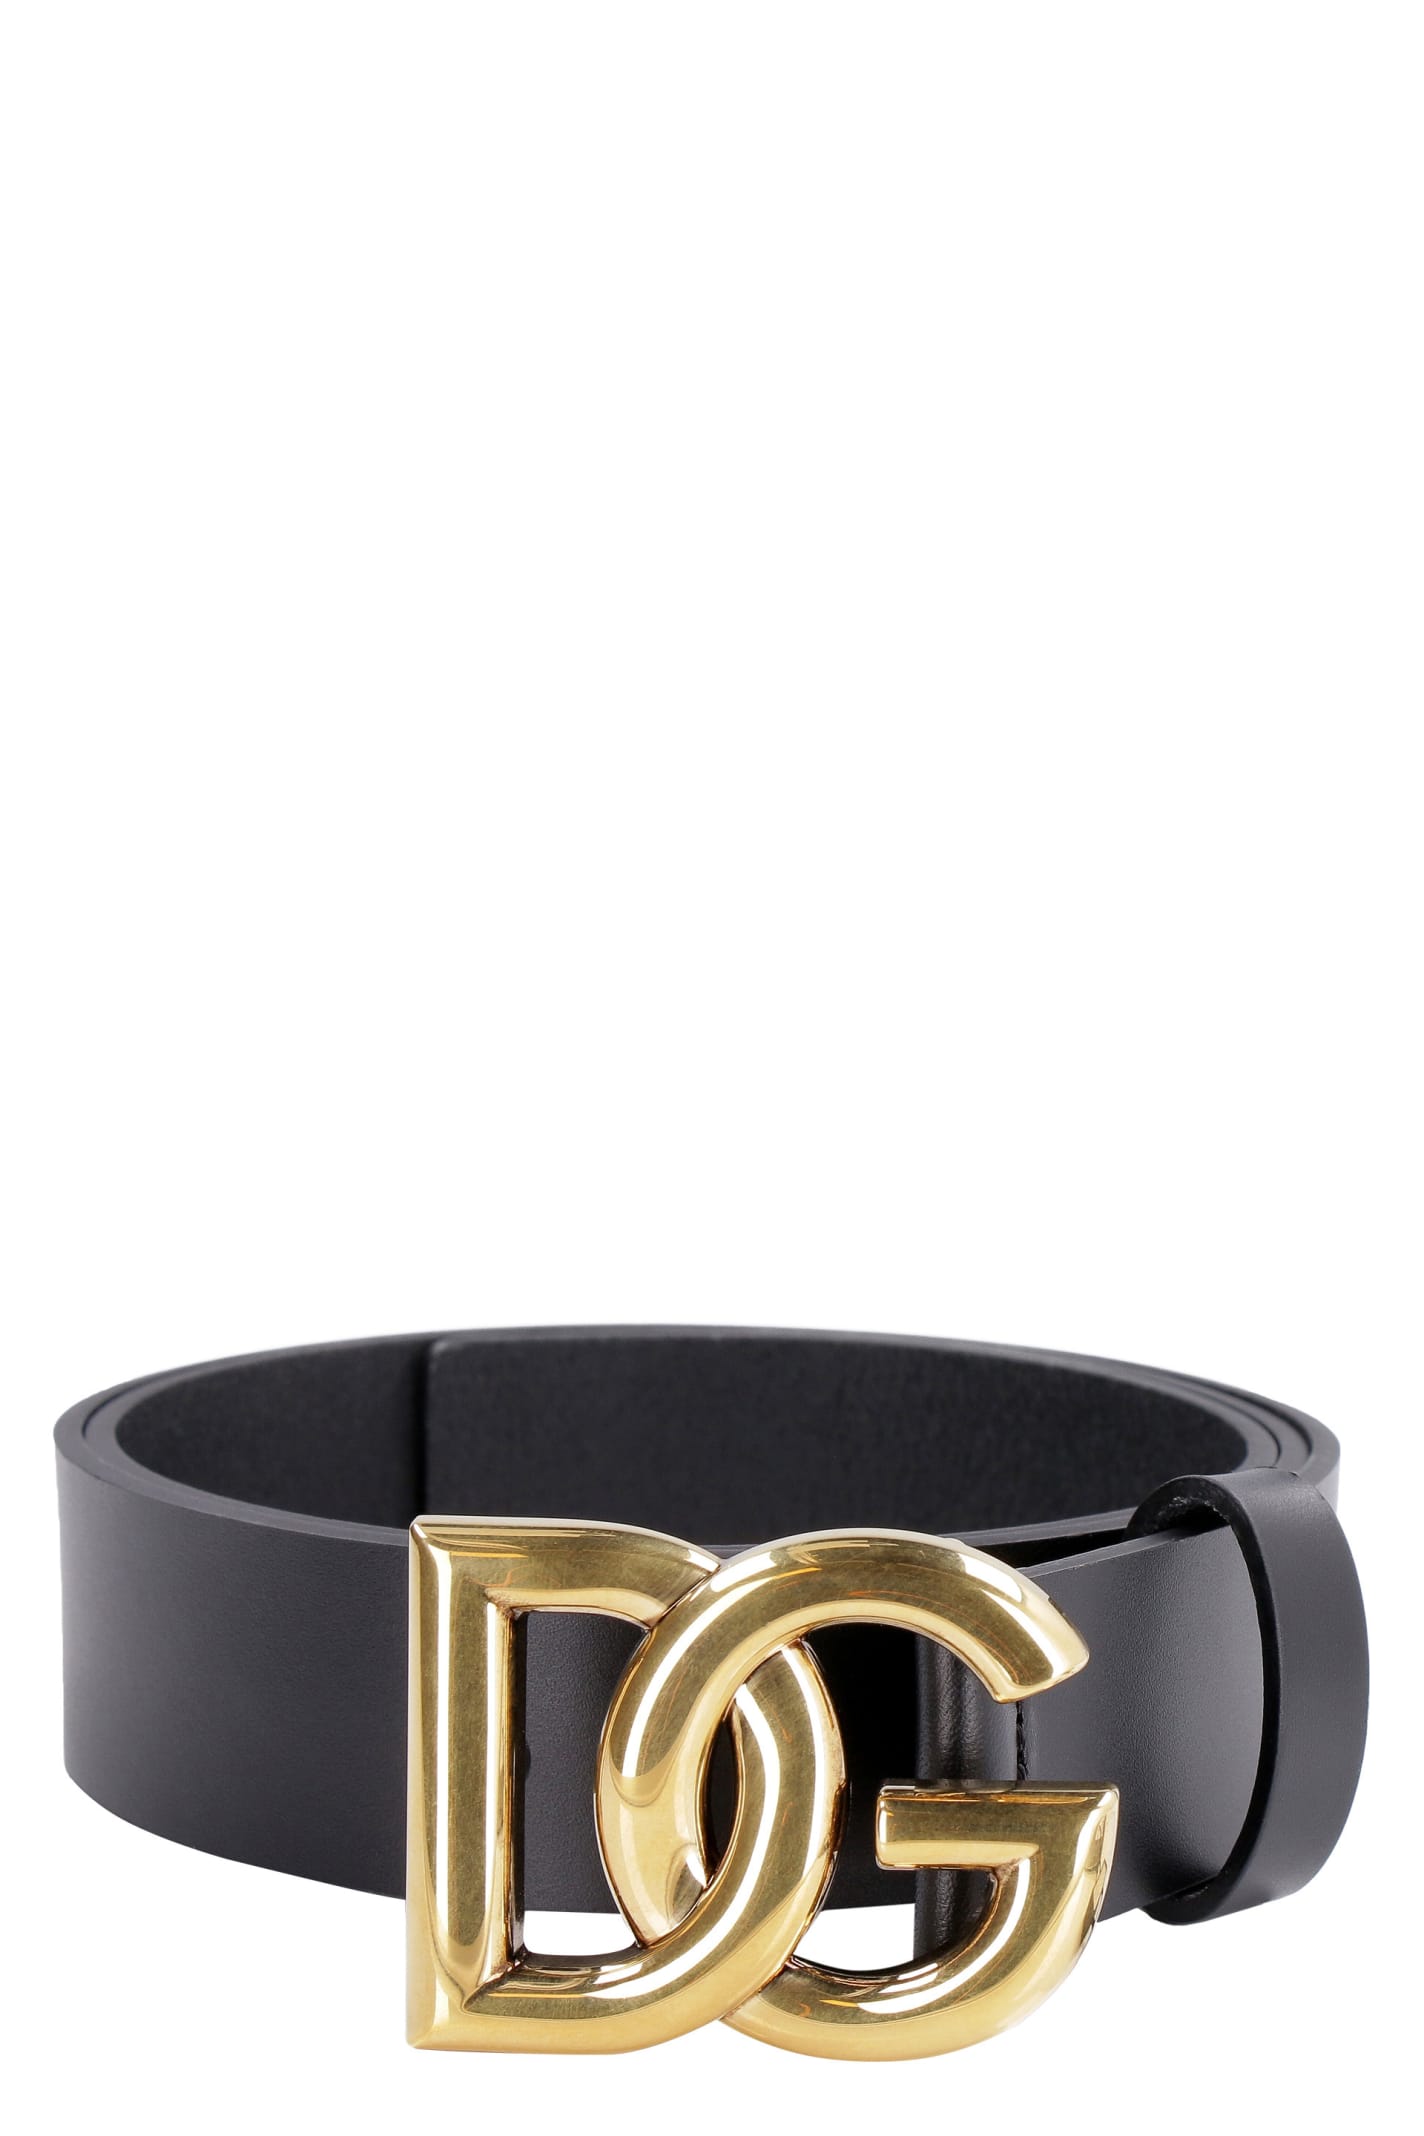 Dolce & Gabbana Leather Belt With Double G Buckle